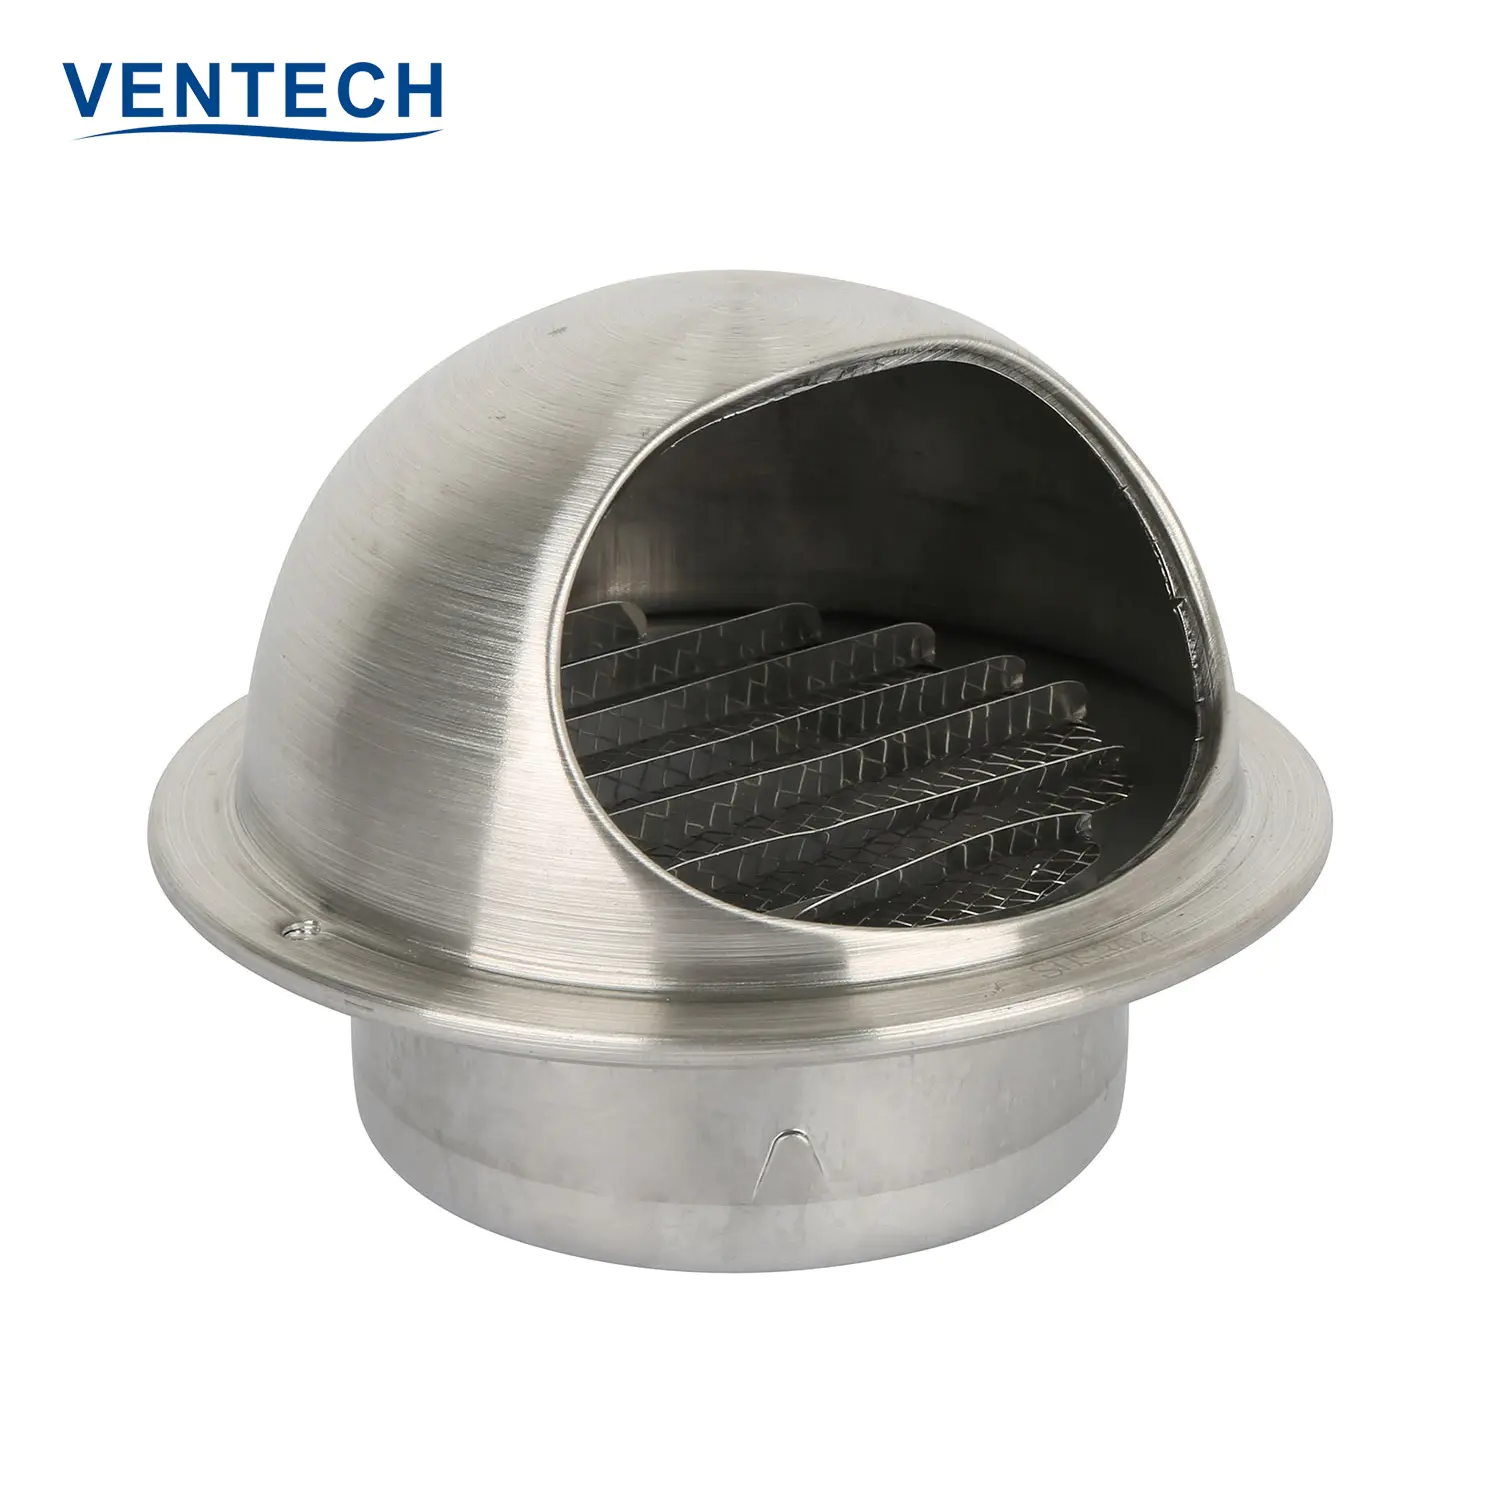 Hvac System Decor Air Kitchen Chimney Wall Vent Cap Stainless Steel Ball Weather Louver For Ventilation